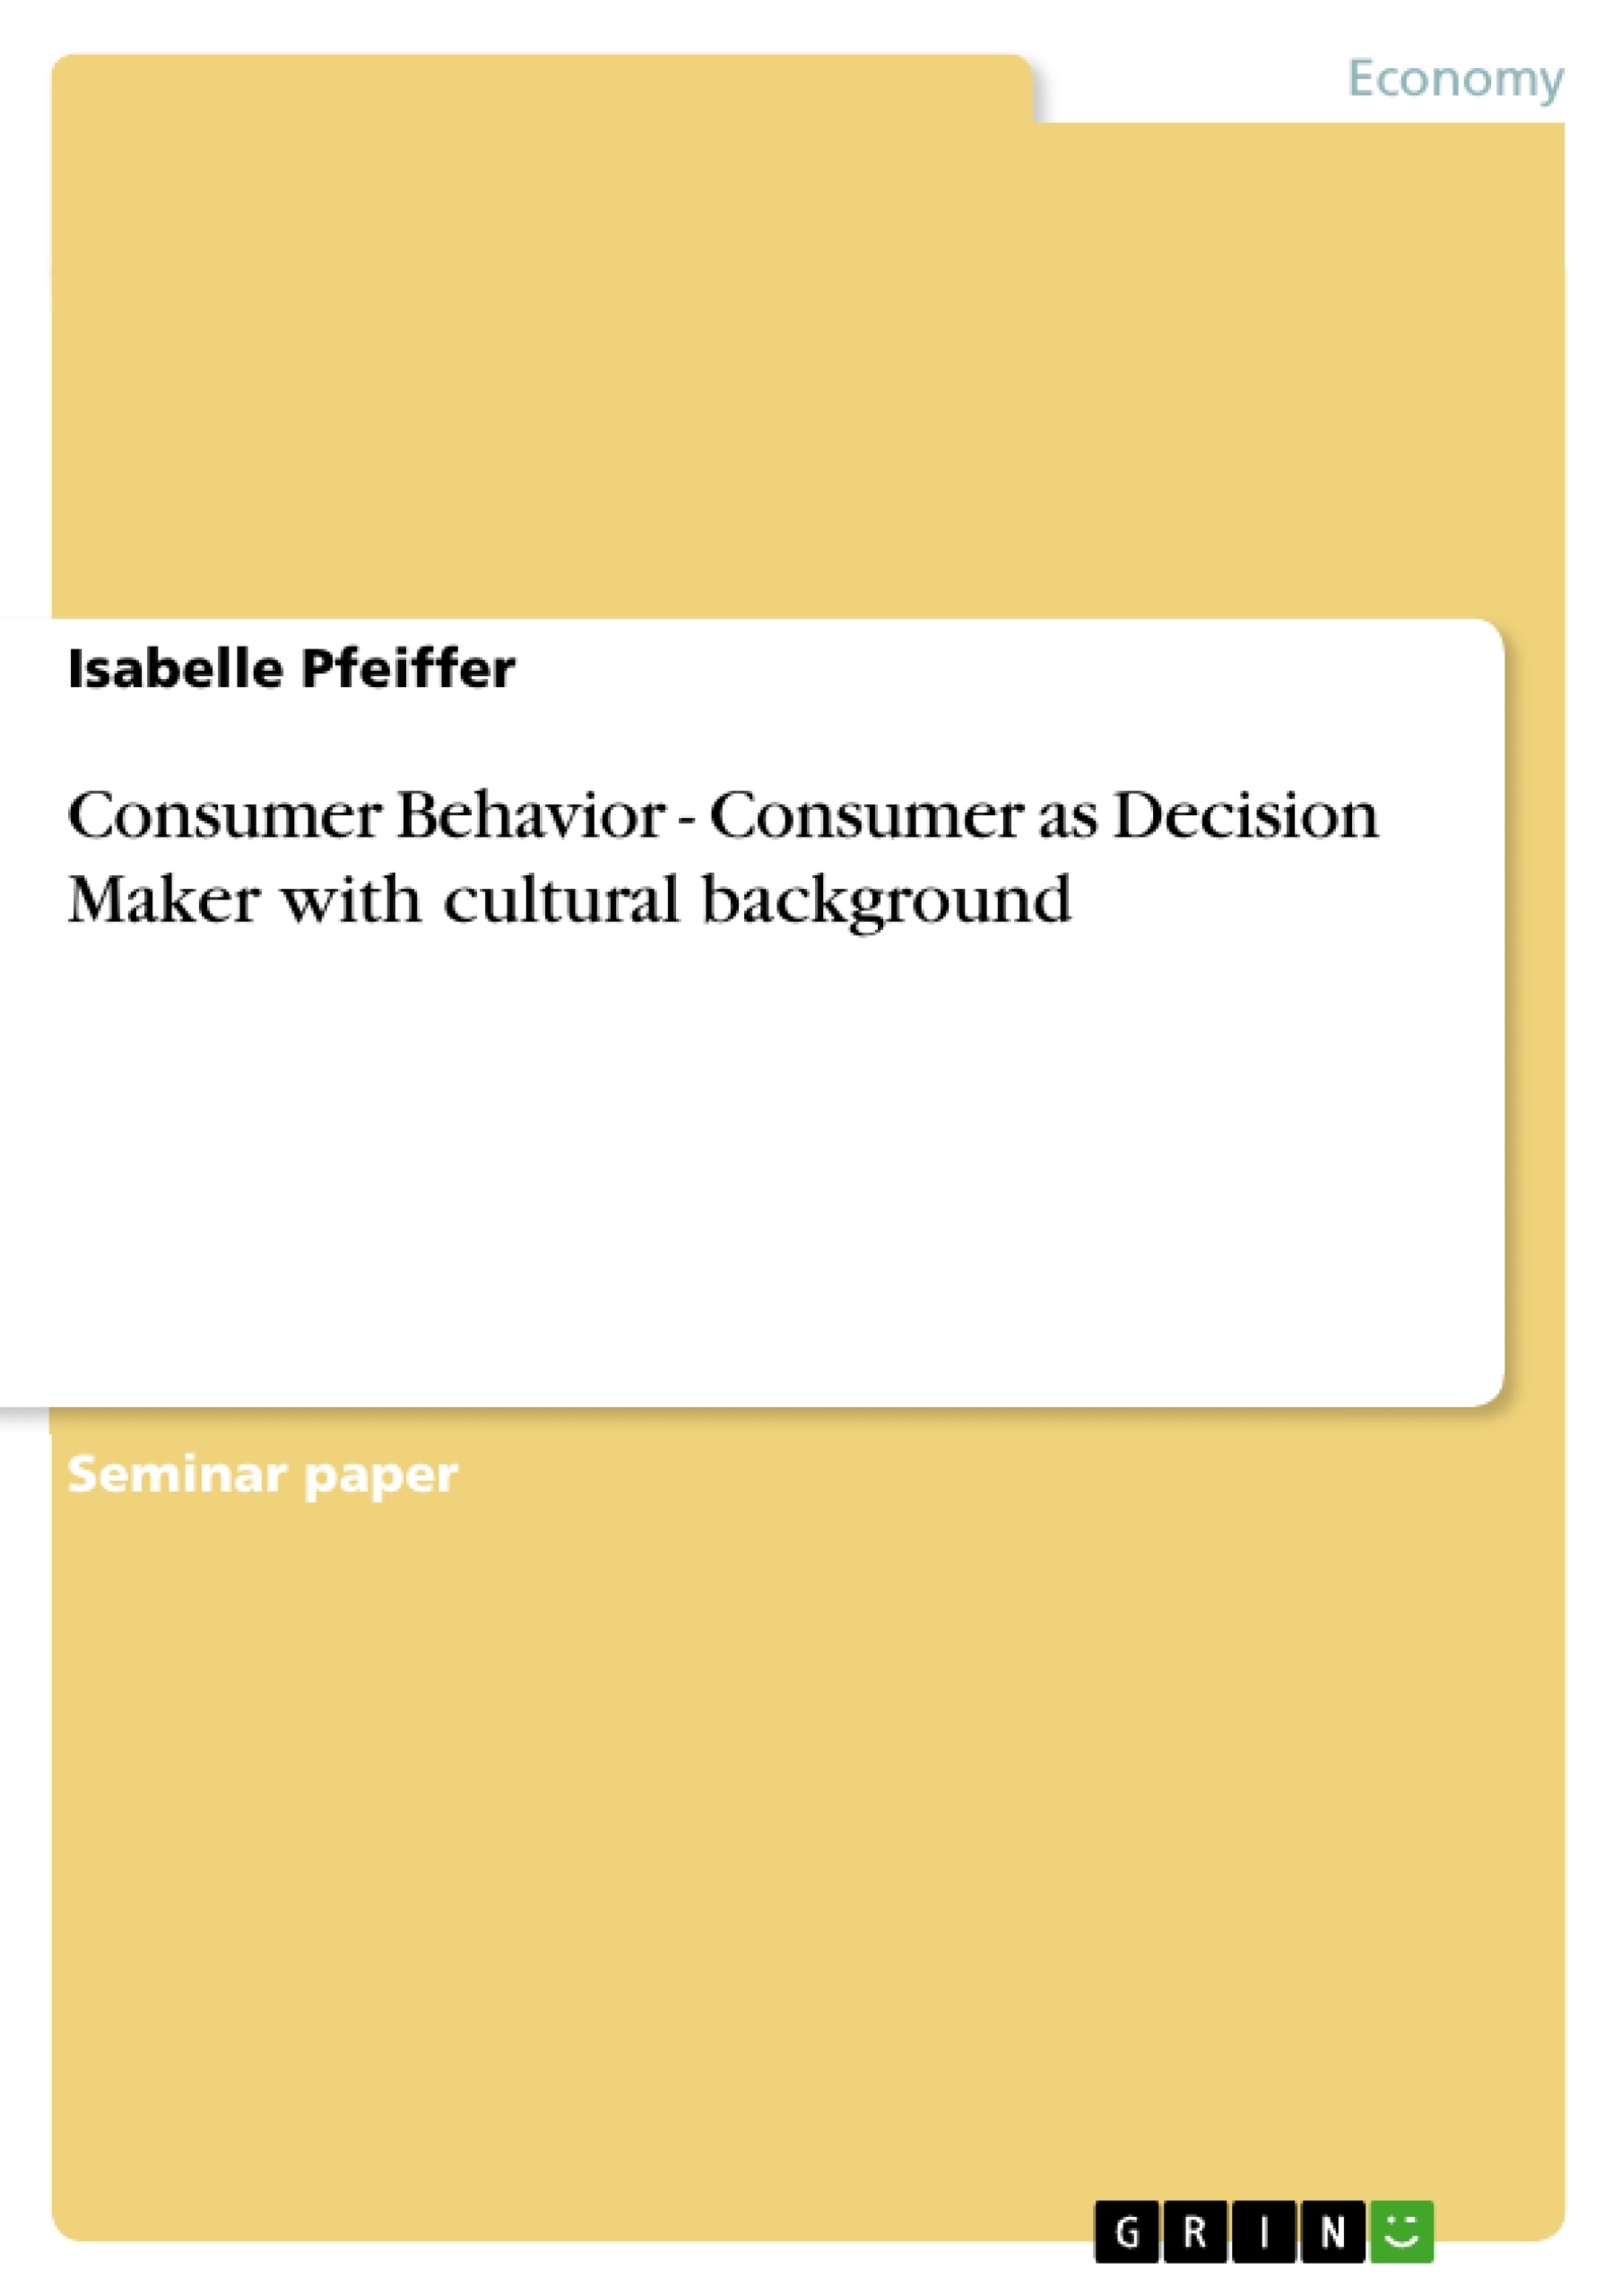 Title: Consumer Behavior - Consumer as Decision Maker with cultural background